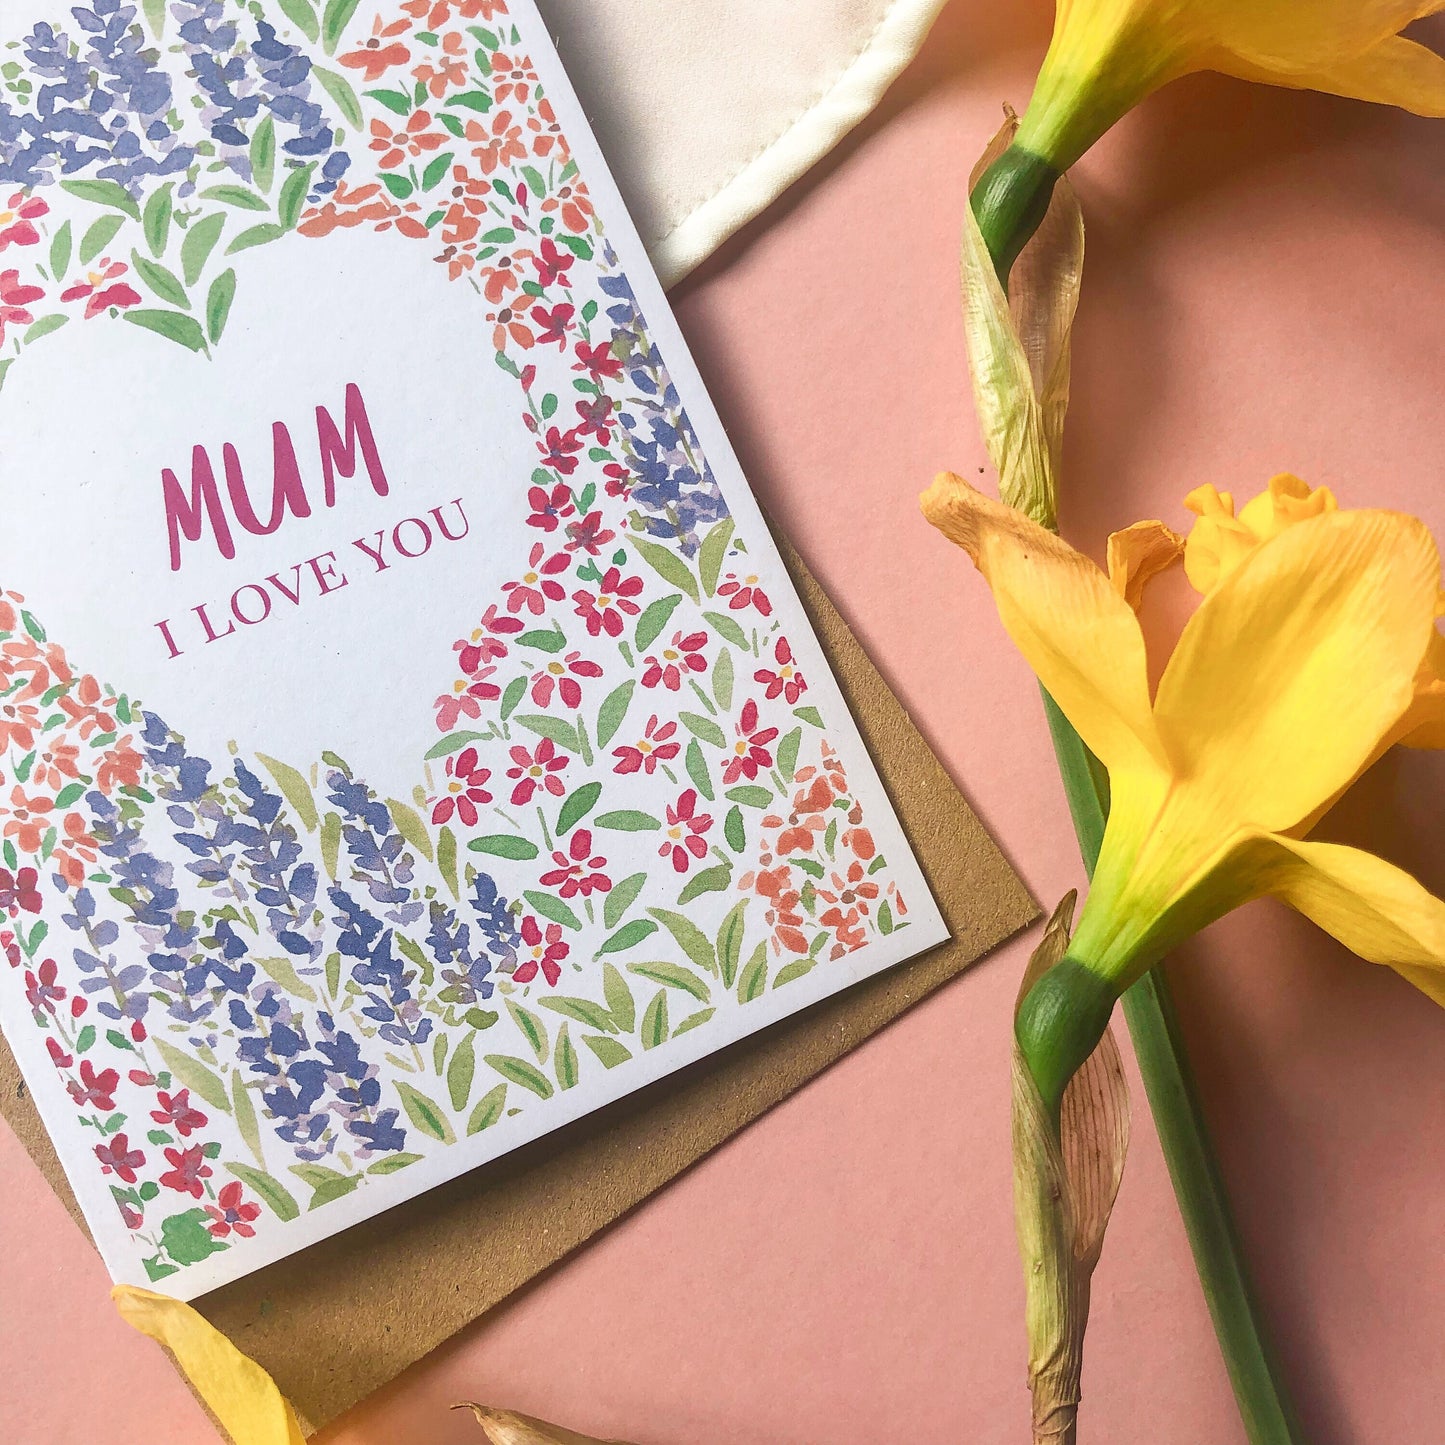 Mum, I Love You Mother's Day Card A6 Flower Garden Card for Mum, Step Mum - Hand Painted Floral Watercolour Garden Wild Flowers Eco Friendly